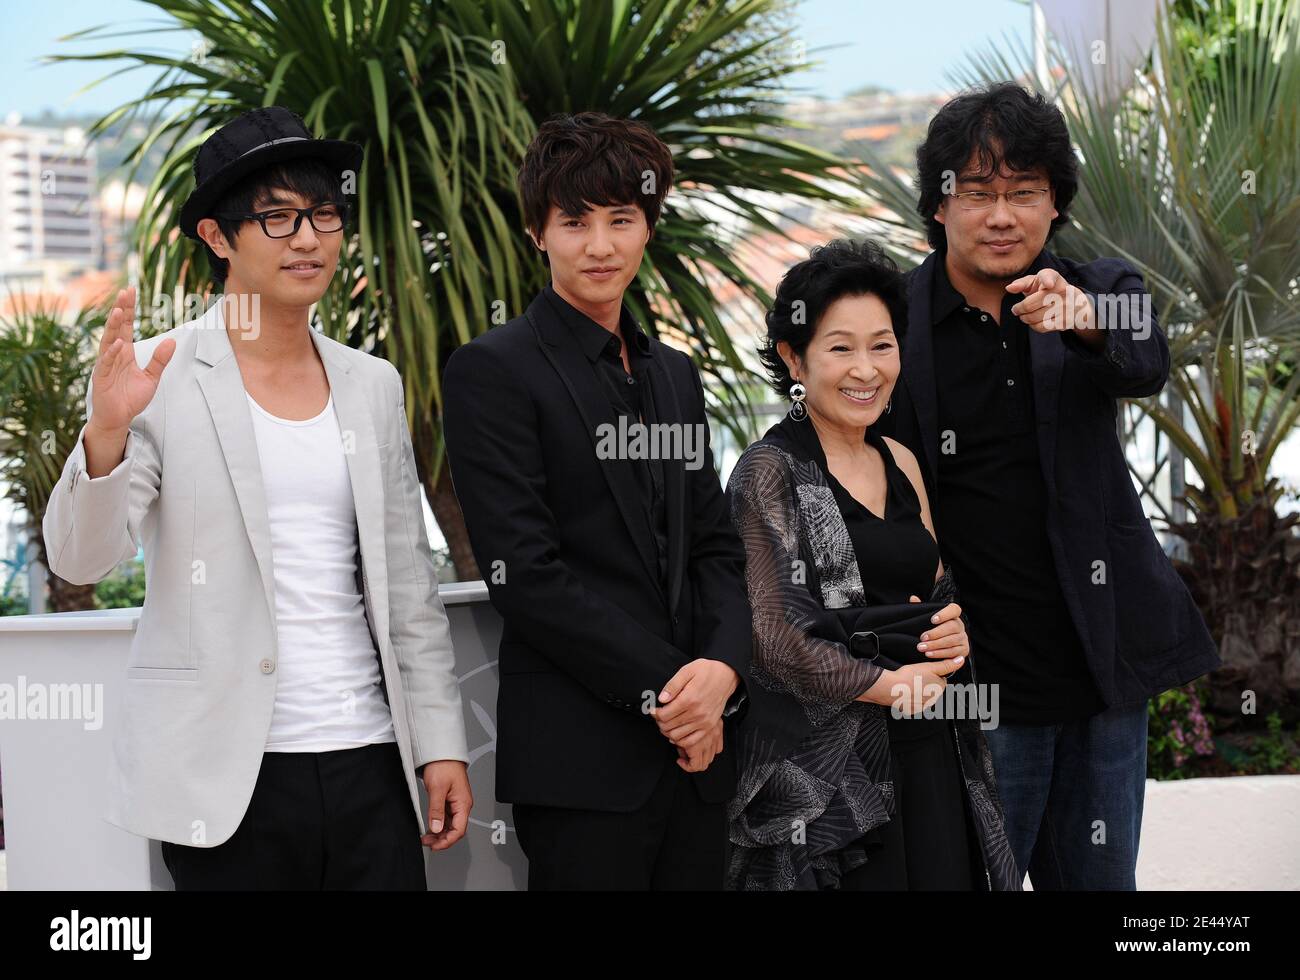 'Jin Goo, Won Bin, Kim Hye-Ja and director Bong Joon pose during the photo call of ''Mother'' at the 62nd Cannes Film Festival. Cannes, France, May 16, 2009. Photo by Lionel Hahn/ABACAPRESS.COM' Stock Photo